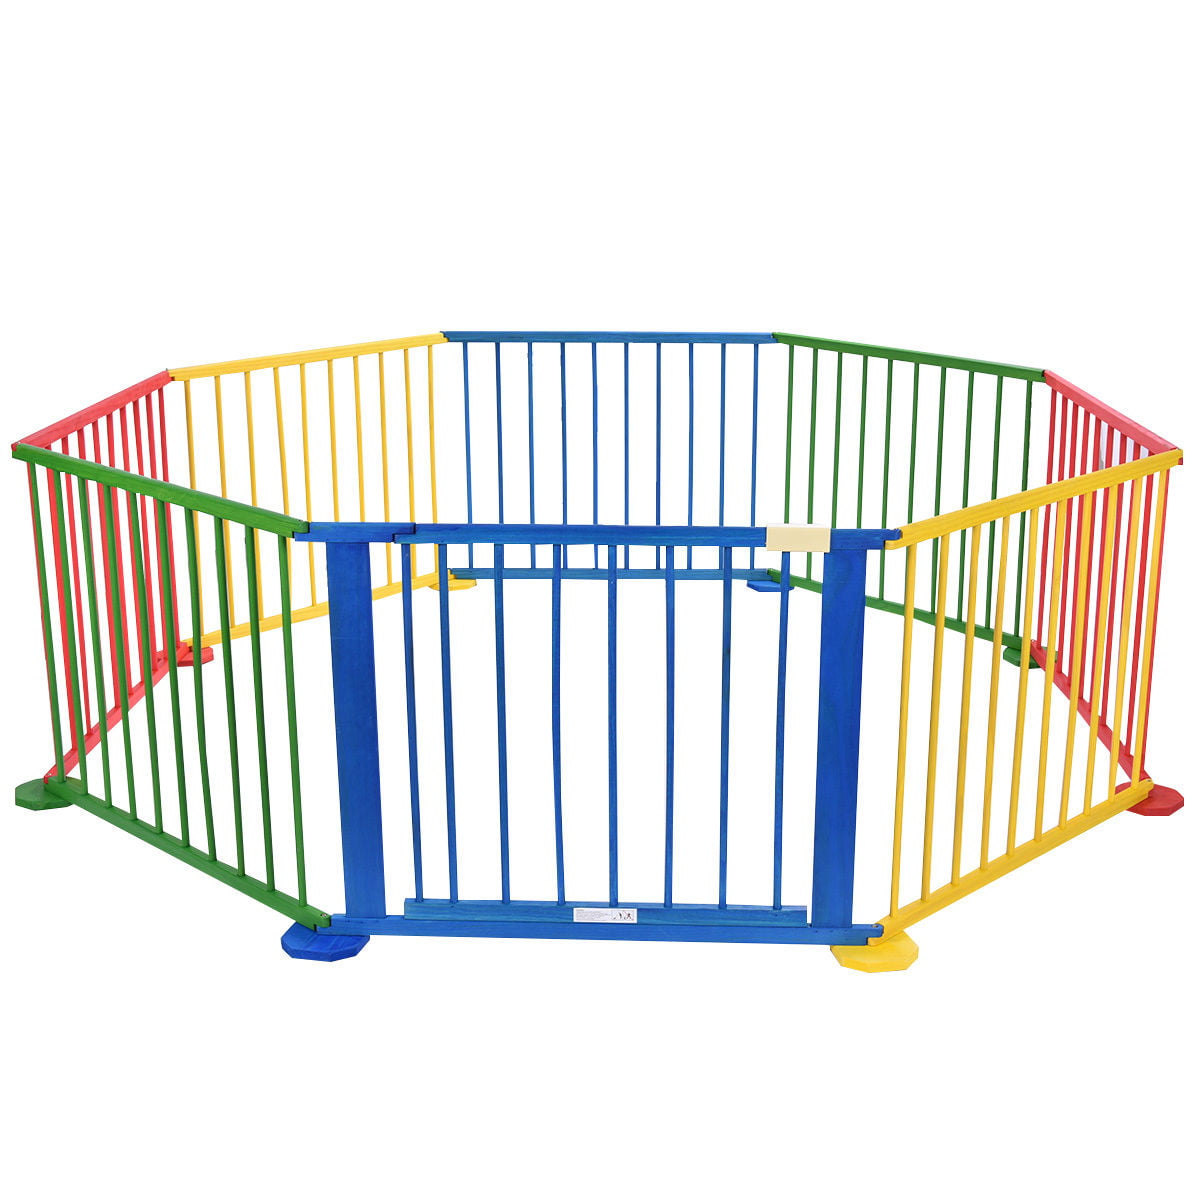 6 Side Baby Child Foldable Kids Playpen Play Pens Room Divider Heavy Duty 